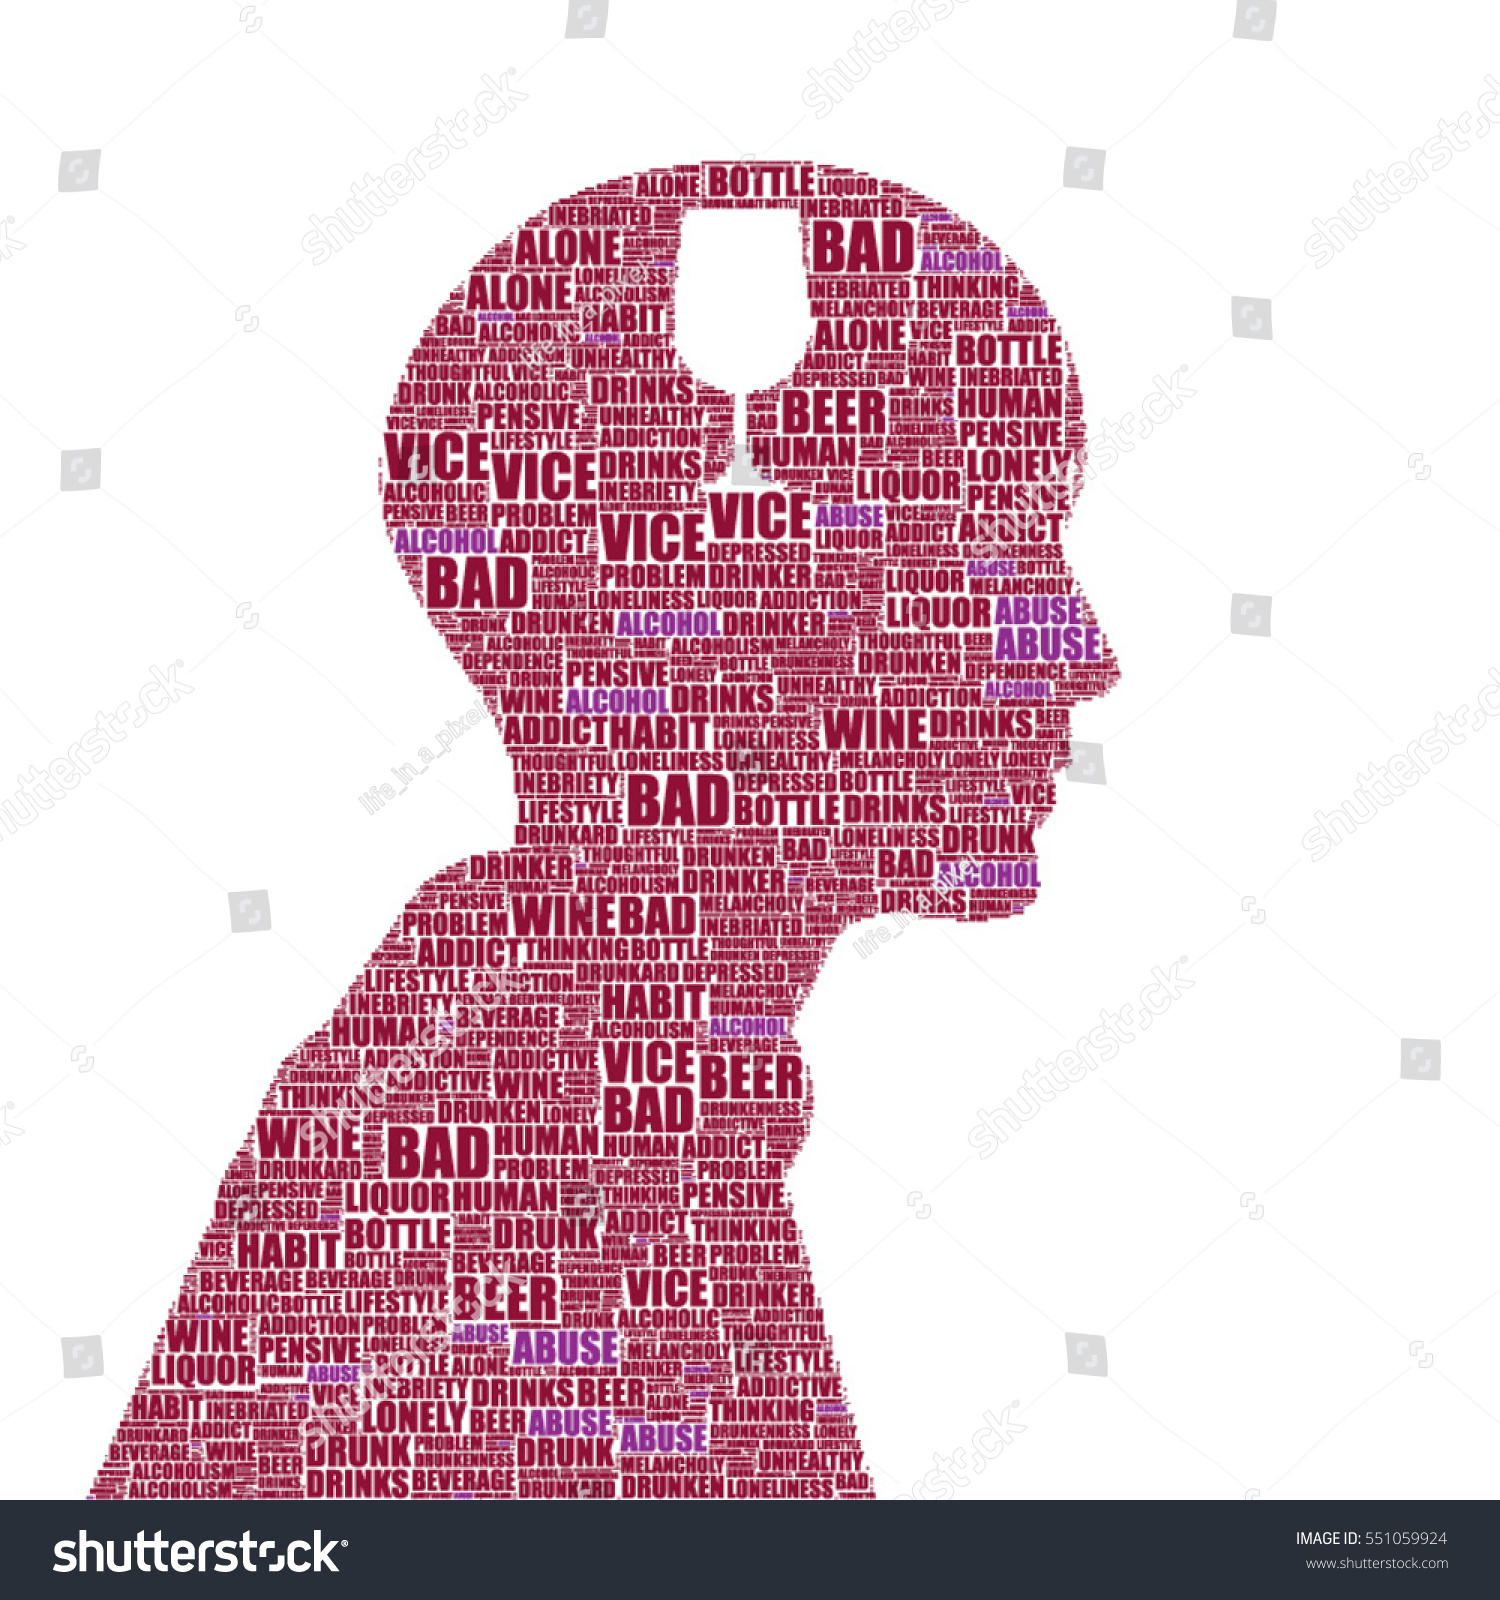 SVG of alcohol addiction concept on a vector tag cloud illustration svg